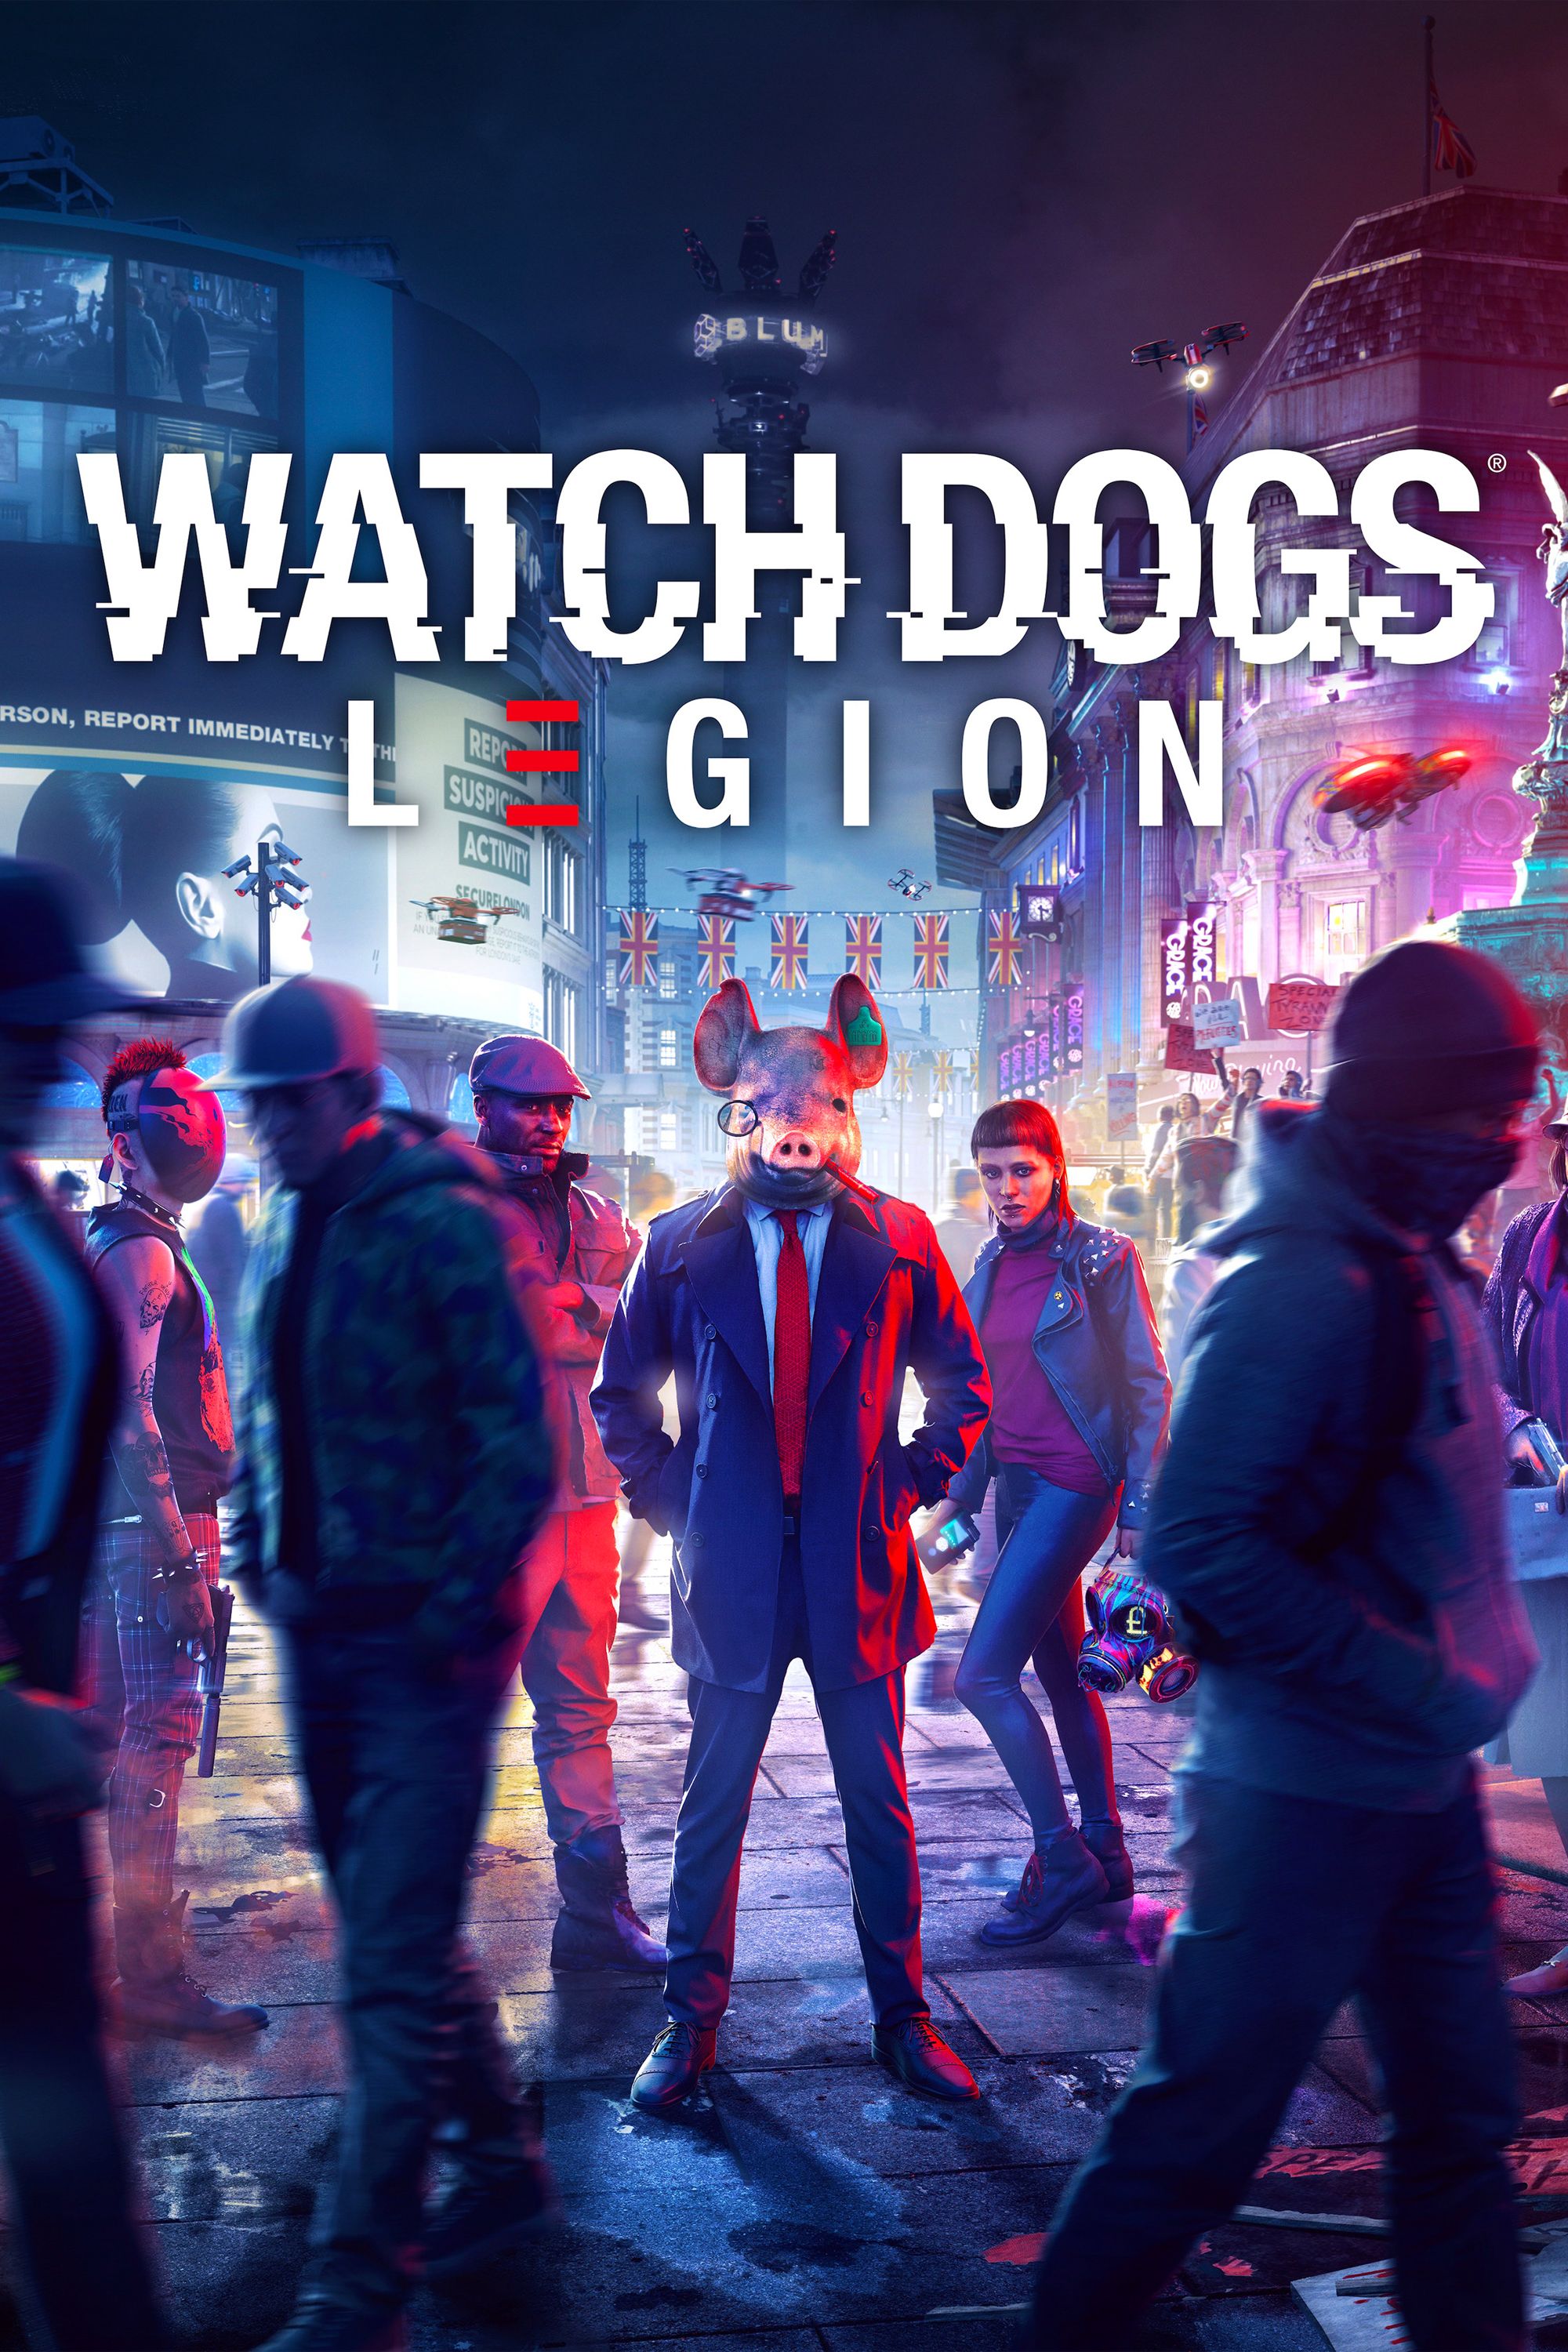 Watch Dogs Legion Poster